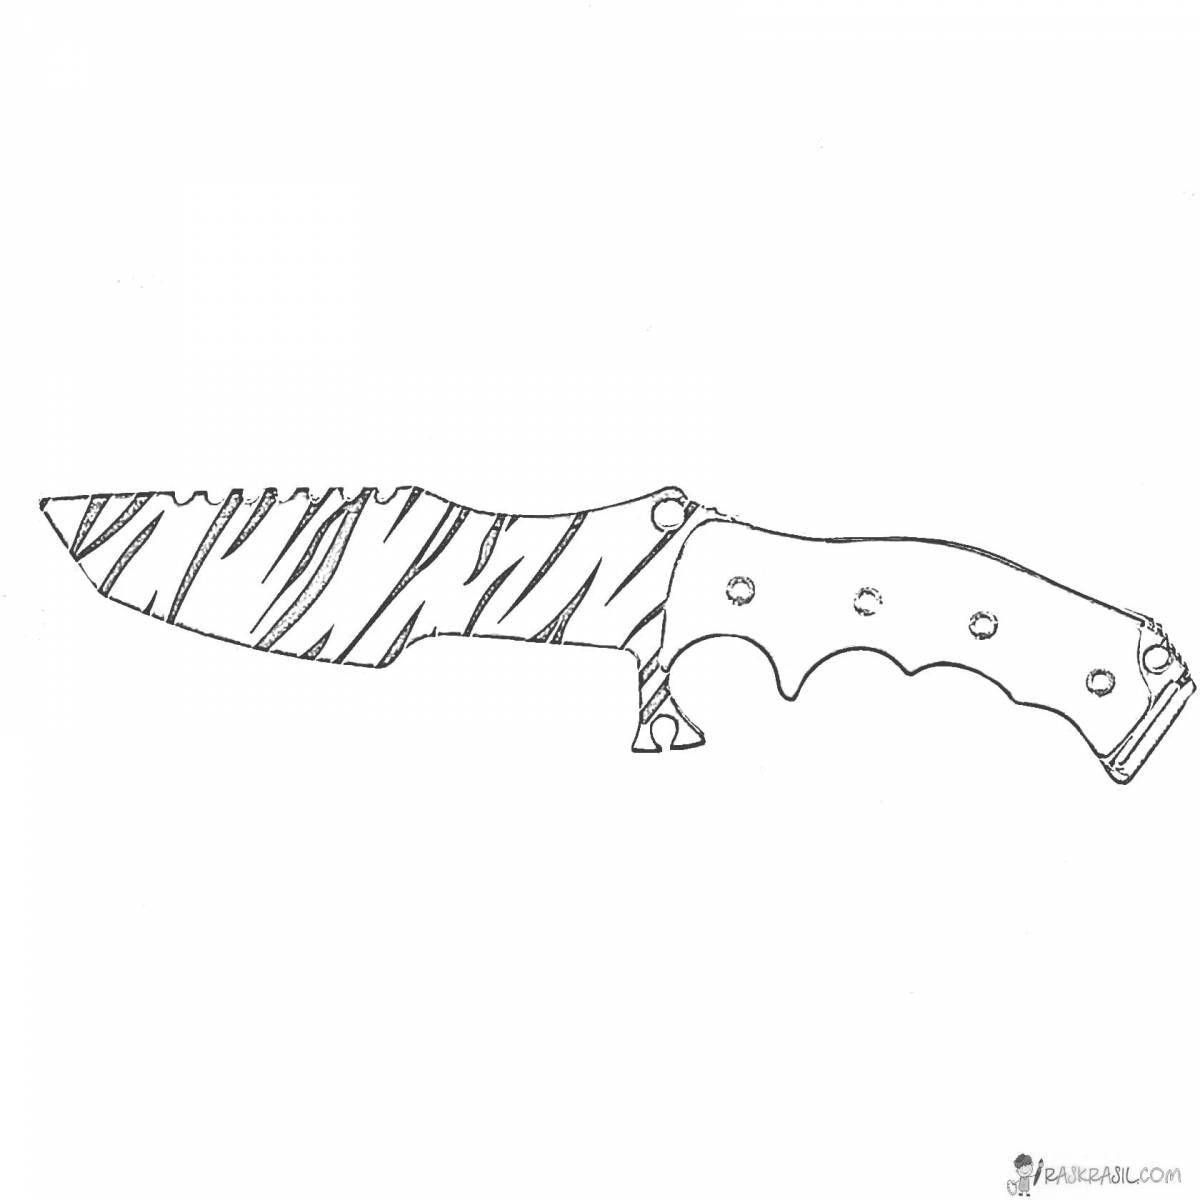 Fancy knives coloring page for confrontation